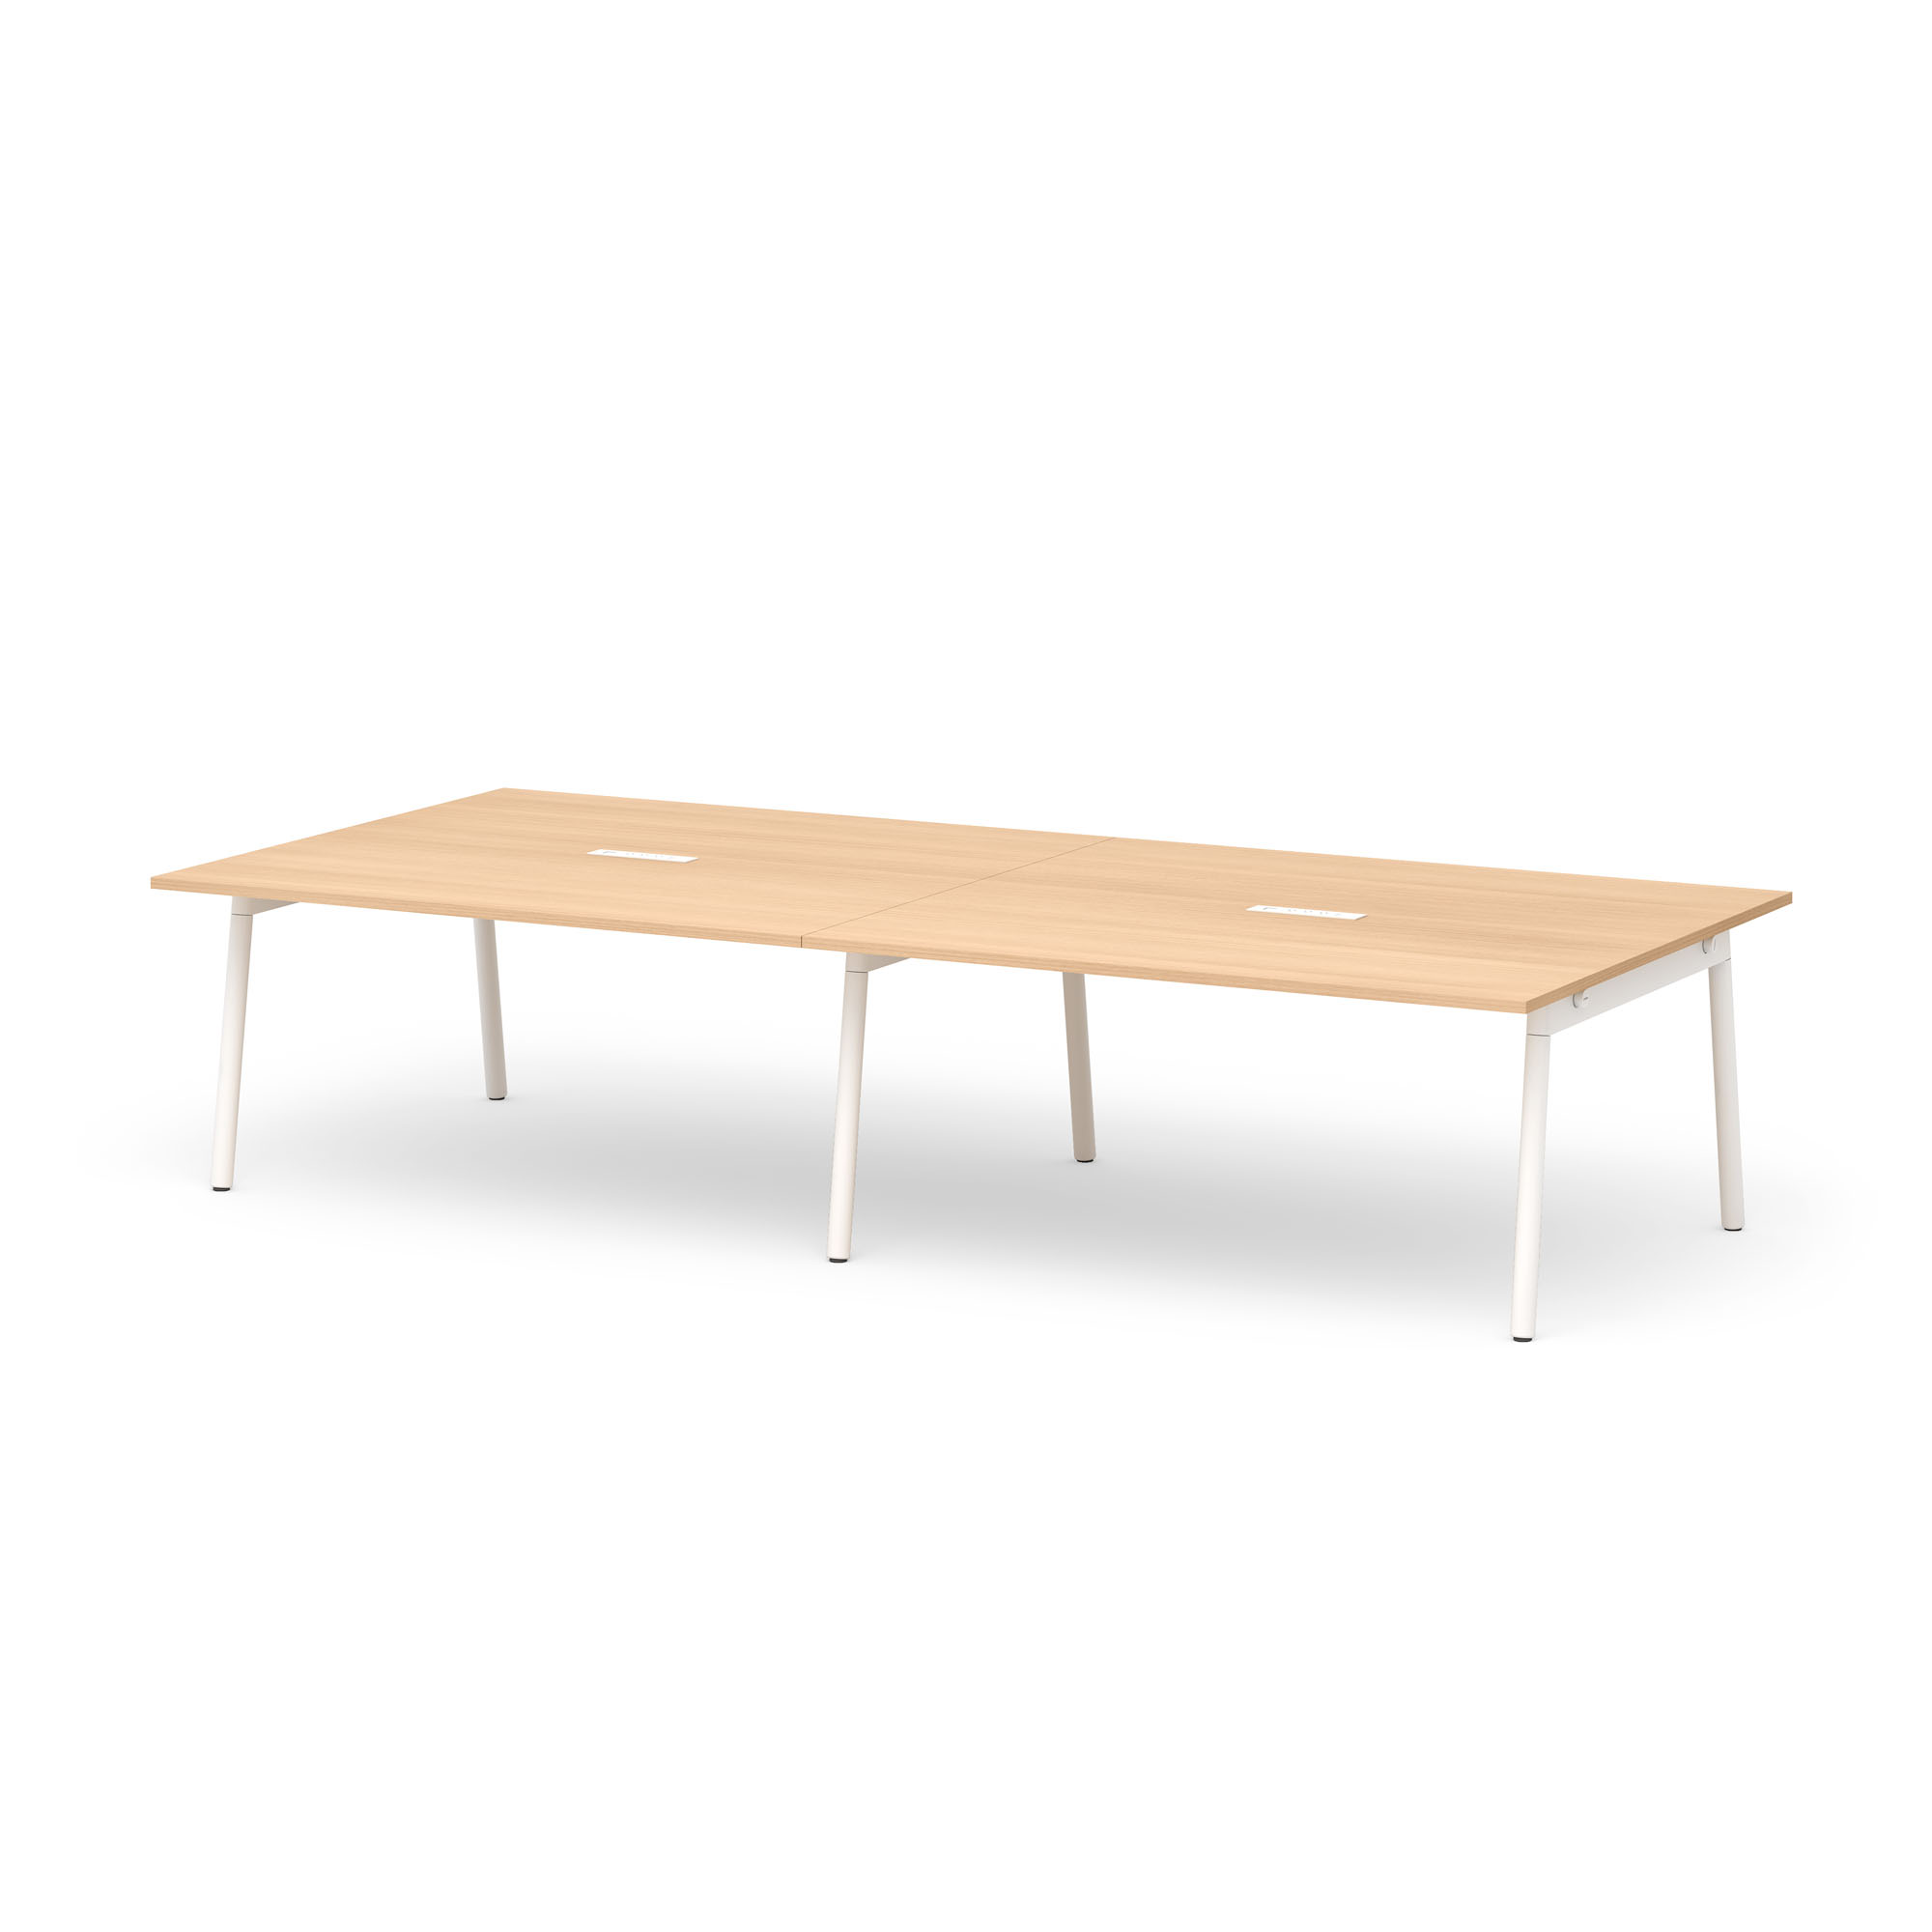 Series A Scale Rectangular Conference Table, White Legs